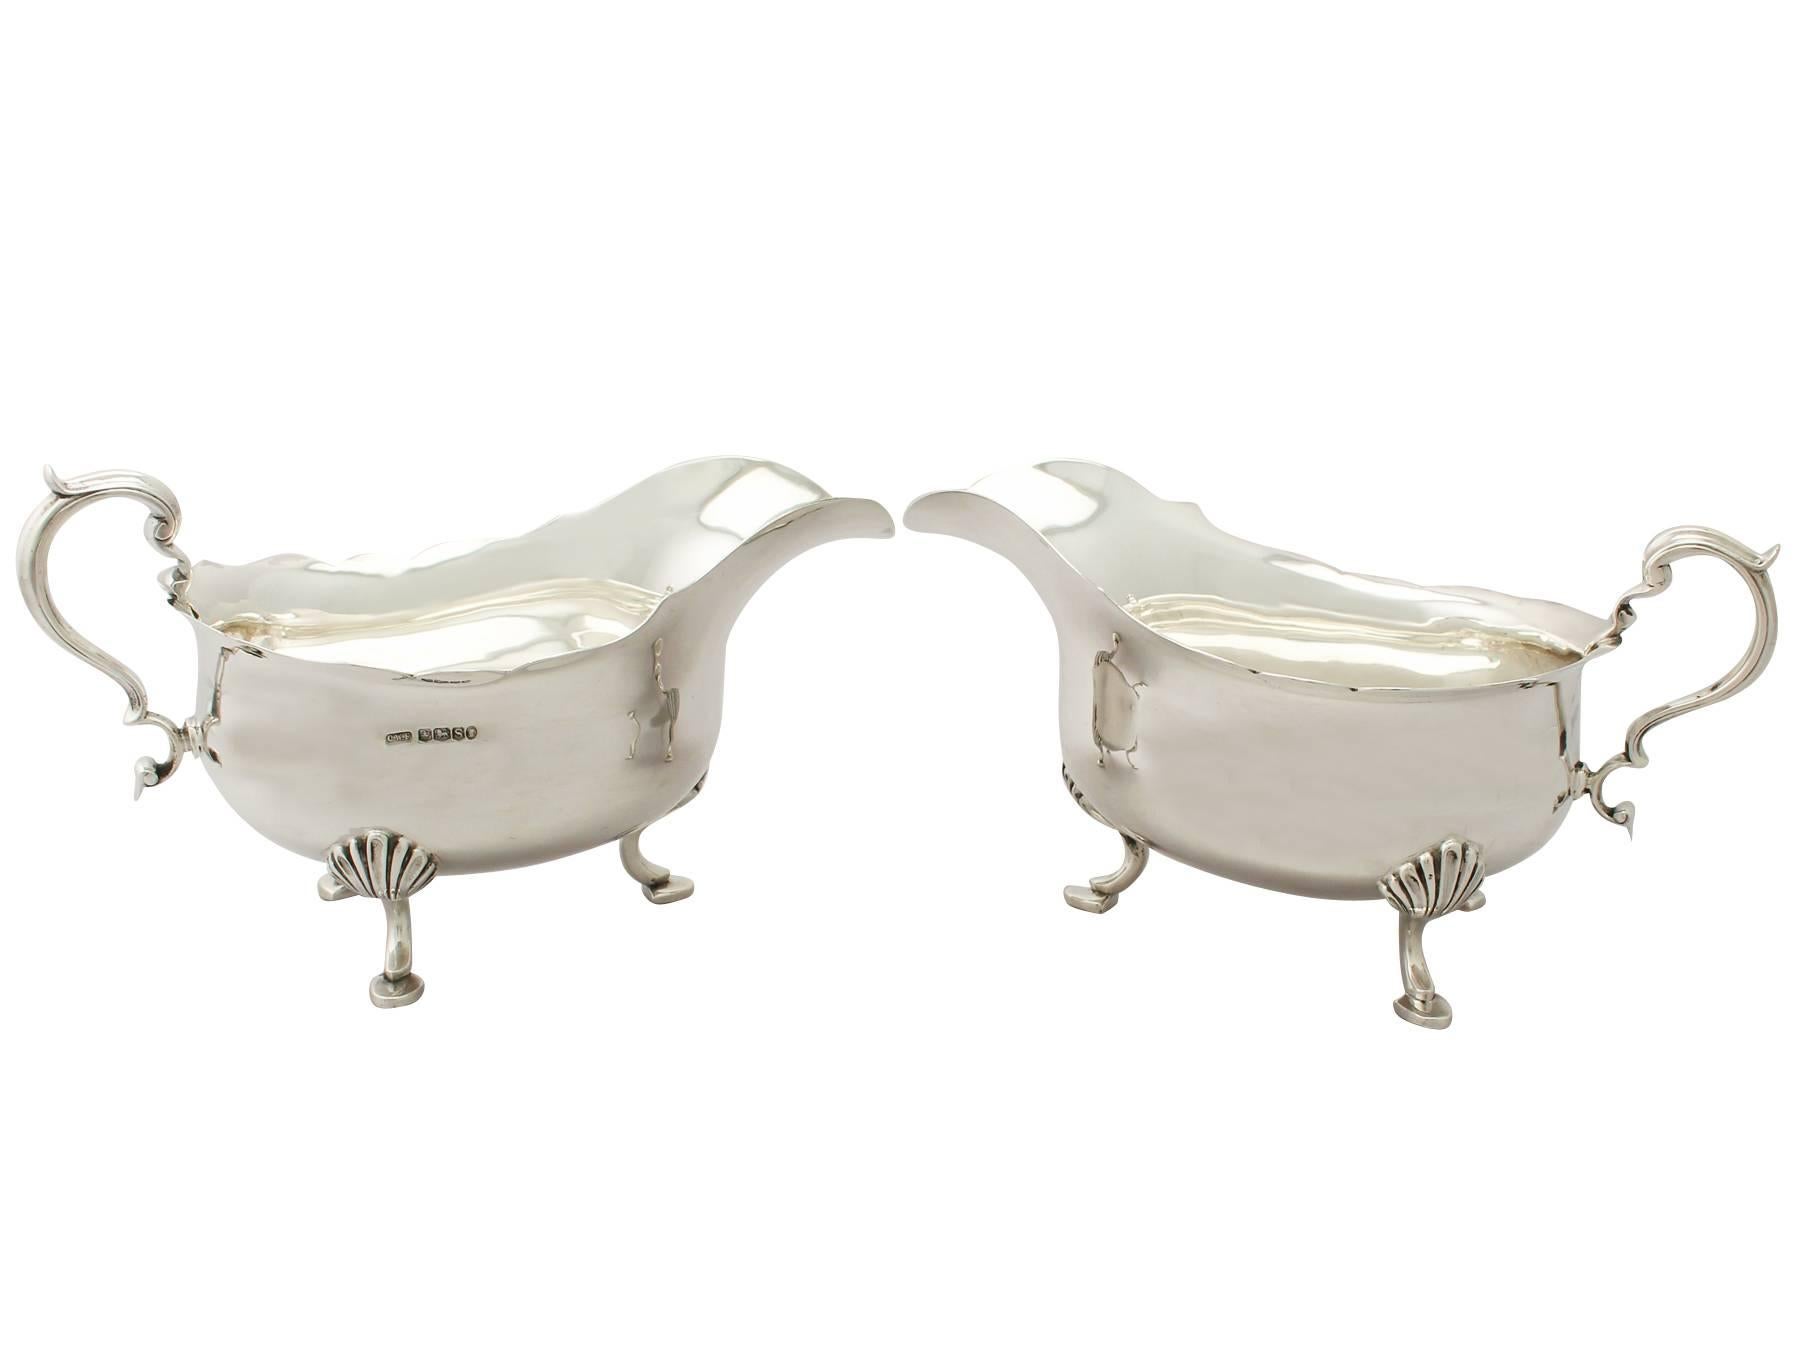 An exceptional, fine and impressive, large pair of antique George V English sterling silver sauceboats made in the George III style, an addition to our dining silverware collection.

These exceptional antique George V sterling silver